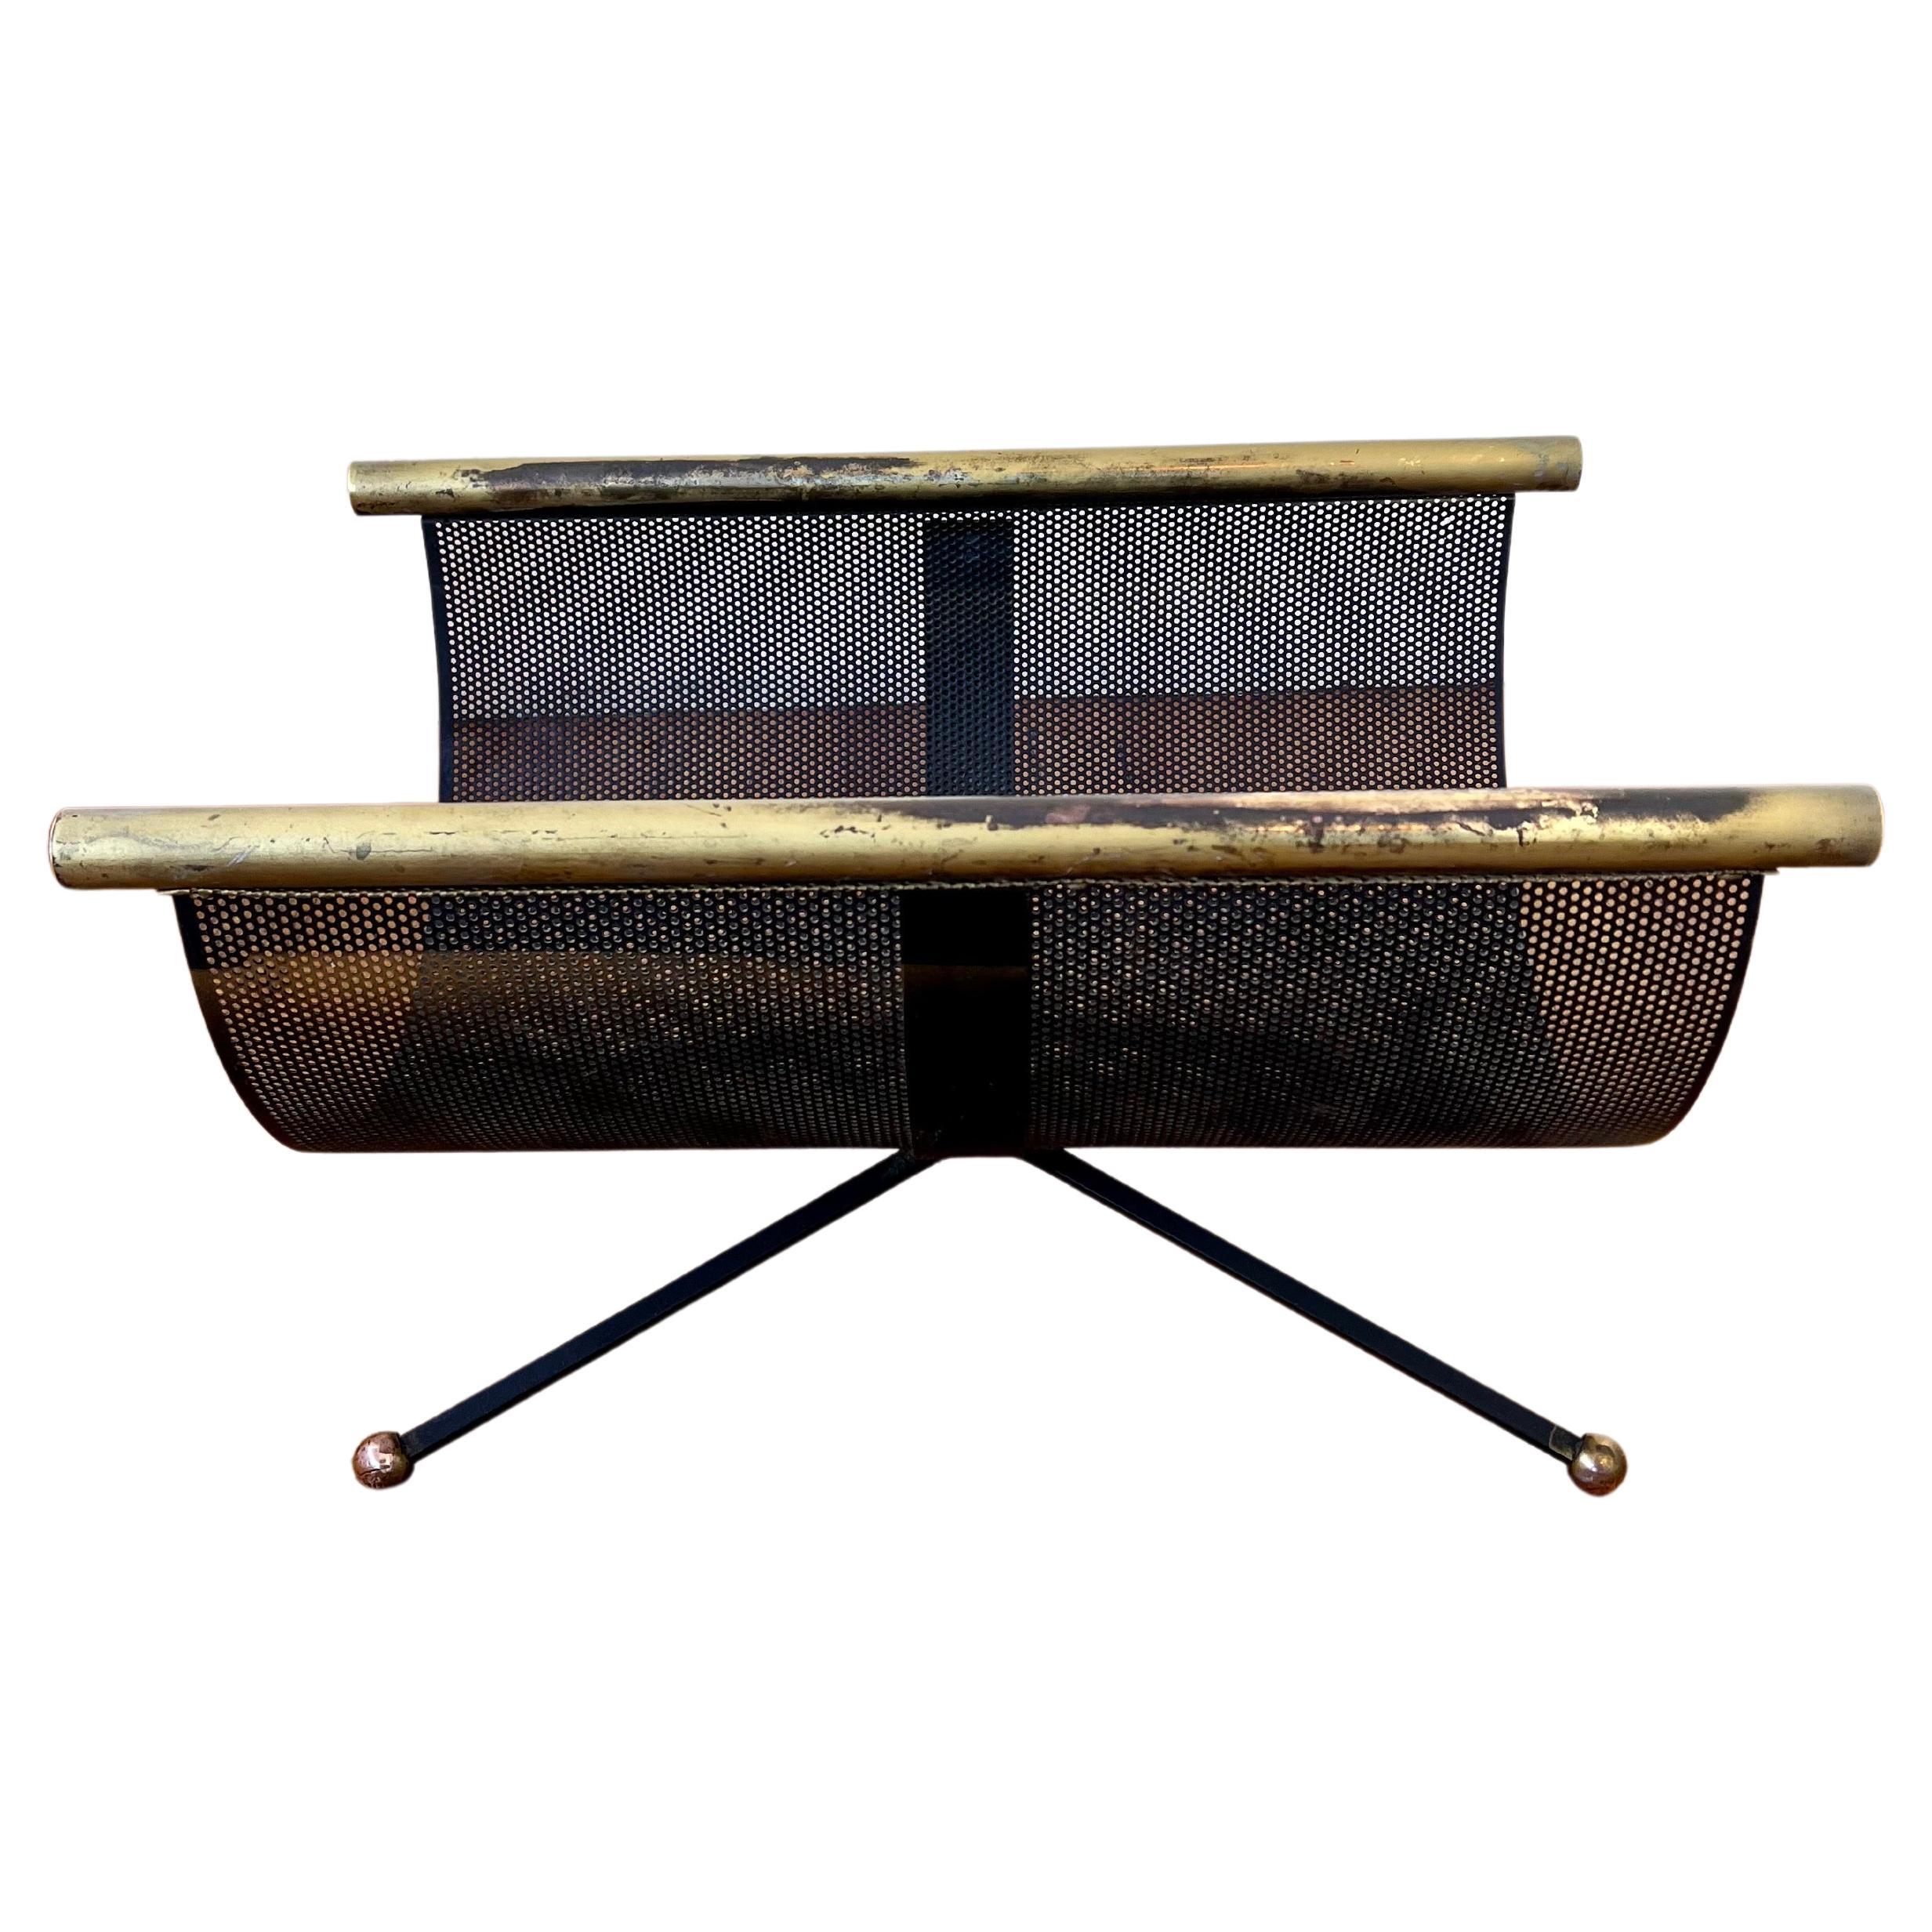 Midcentury Atomic age perforated metal, iron, and brass log holder, 1950s. Original patina and finish.